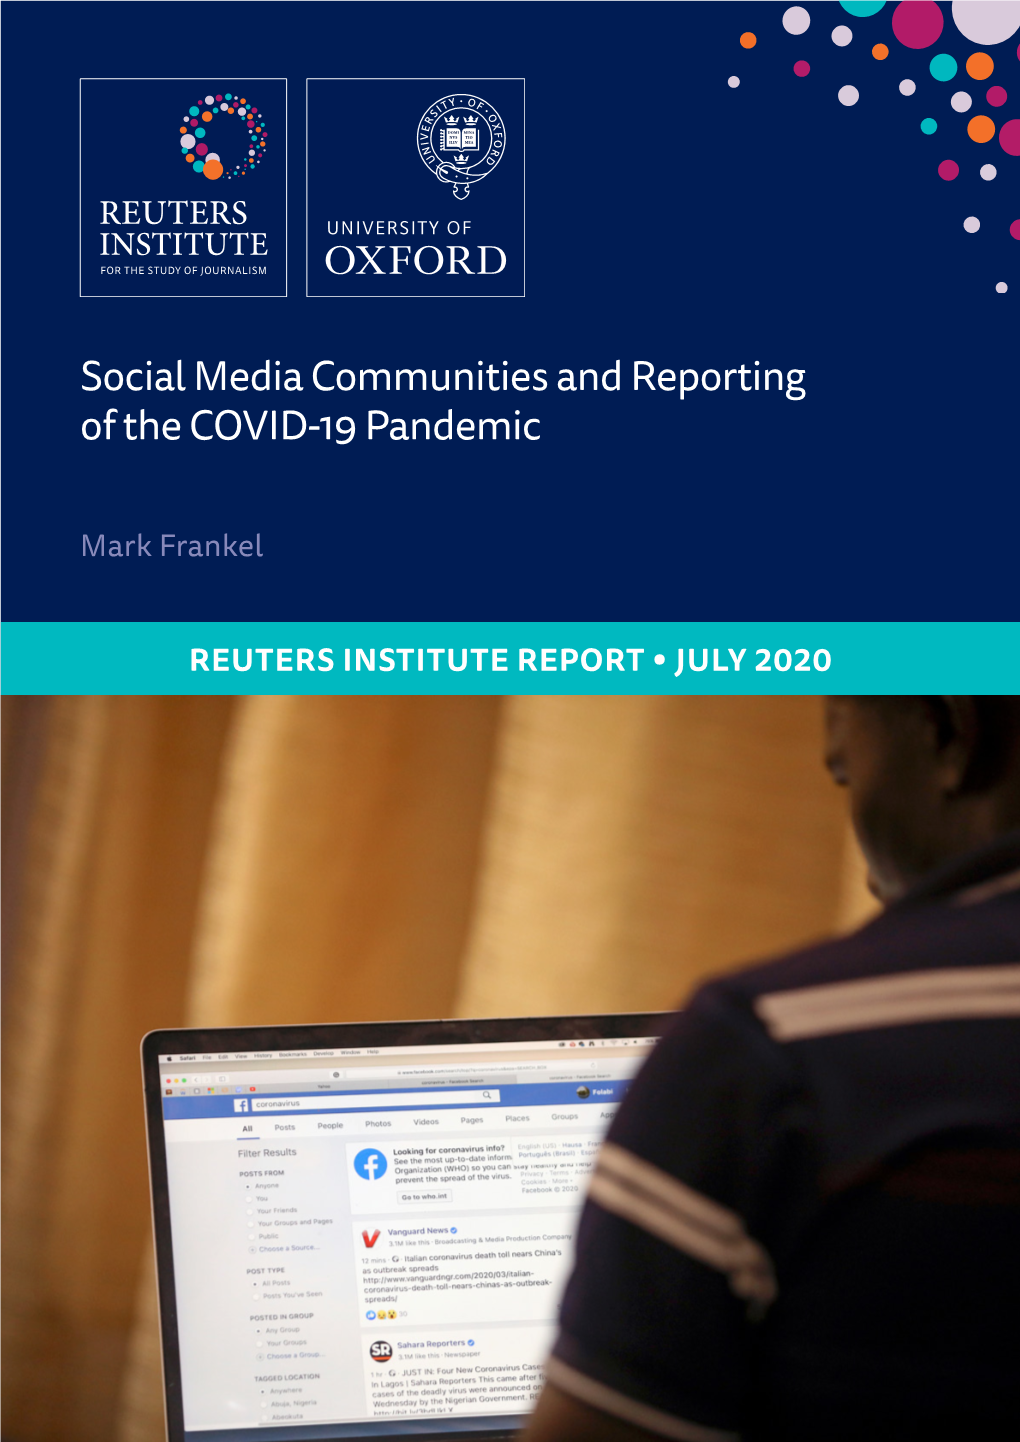 Social Media Communities and Reporting of the COVID-19 Pandemic